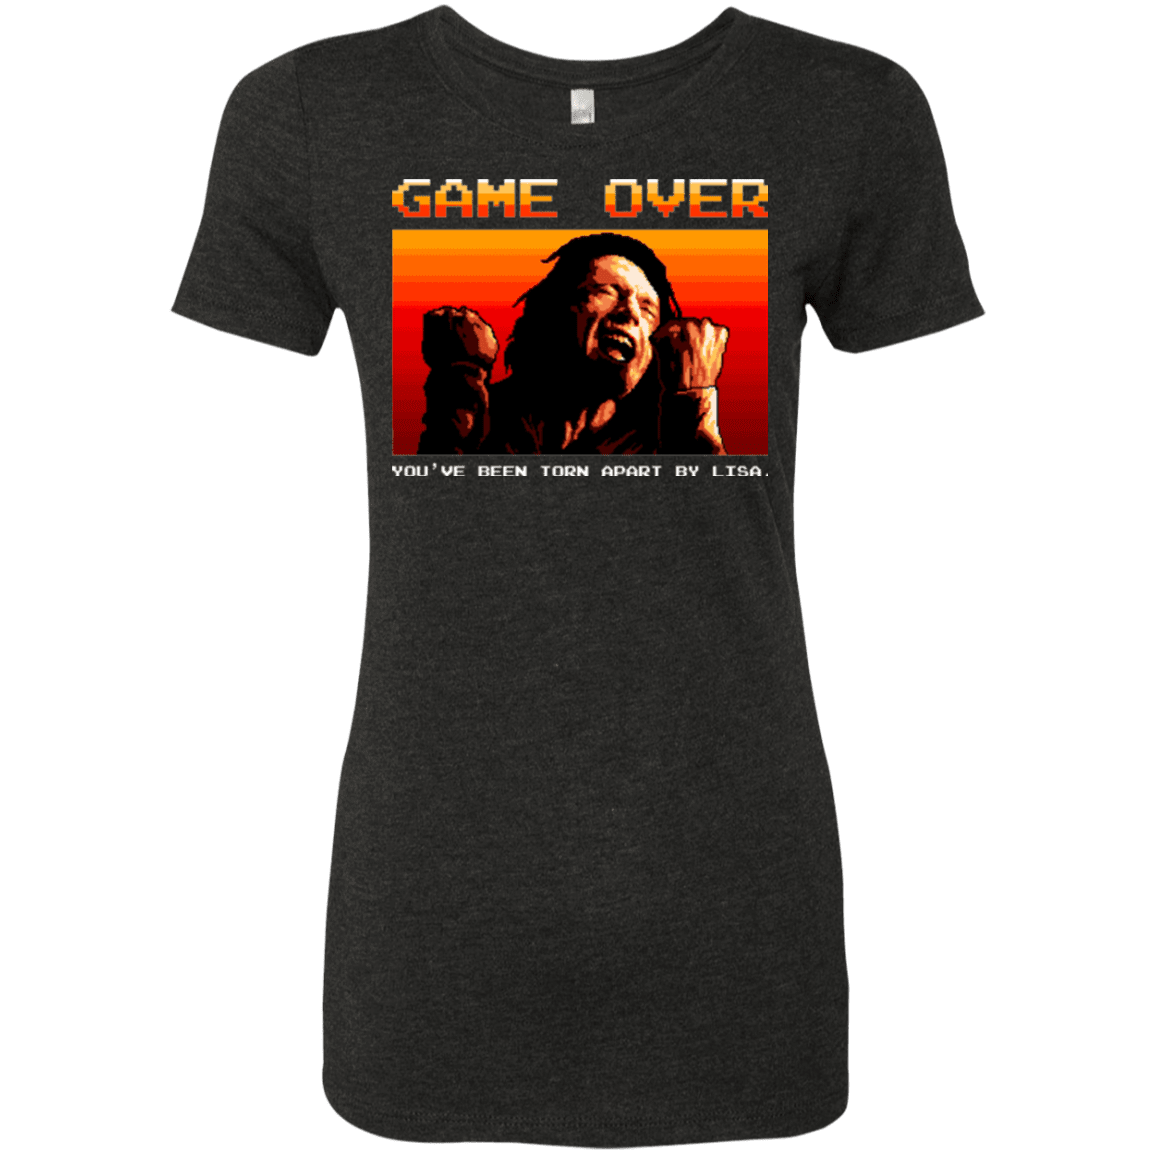 T-Shirts Vintage Black / Small Game Over Women's Triblend T-Shirt